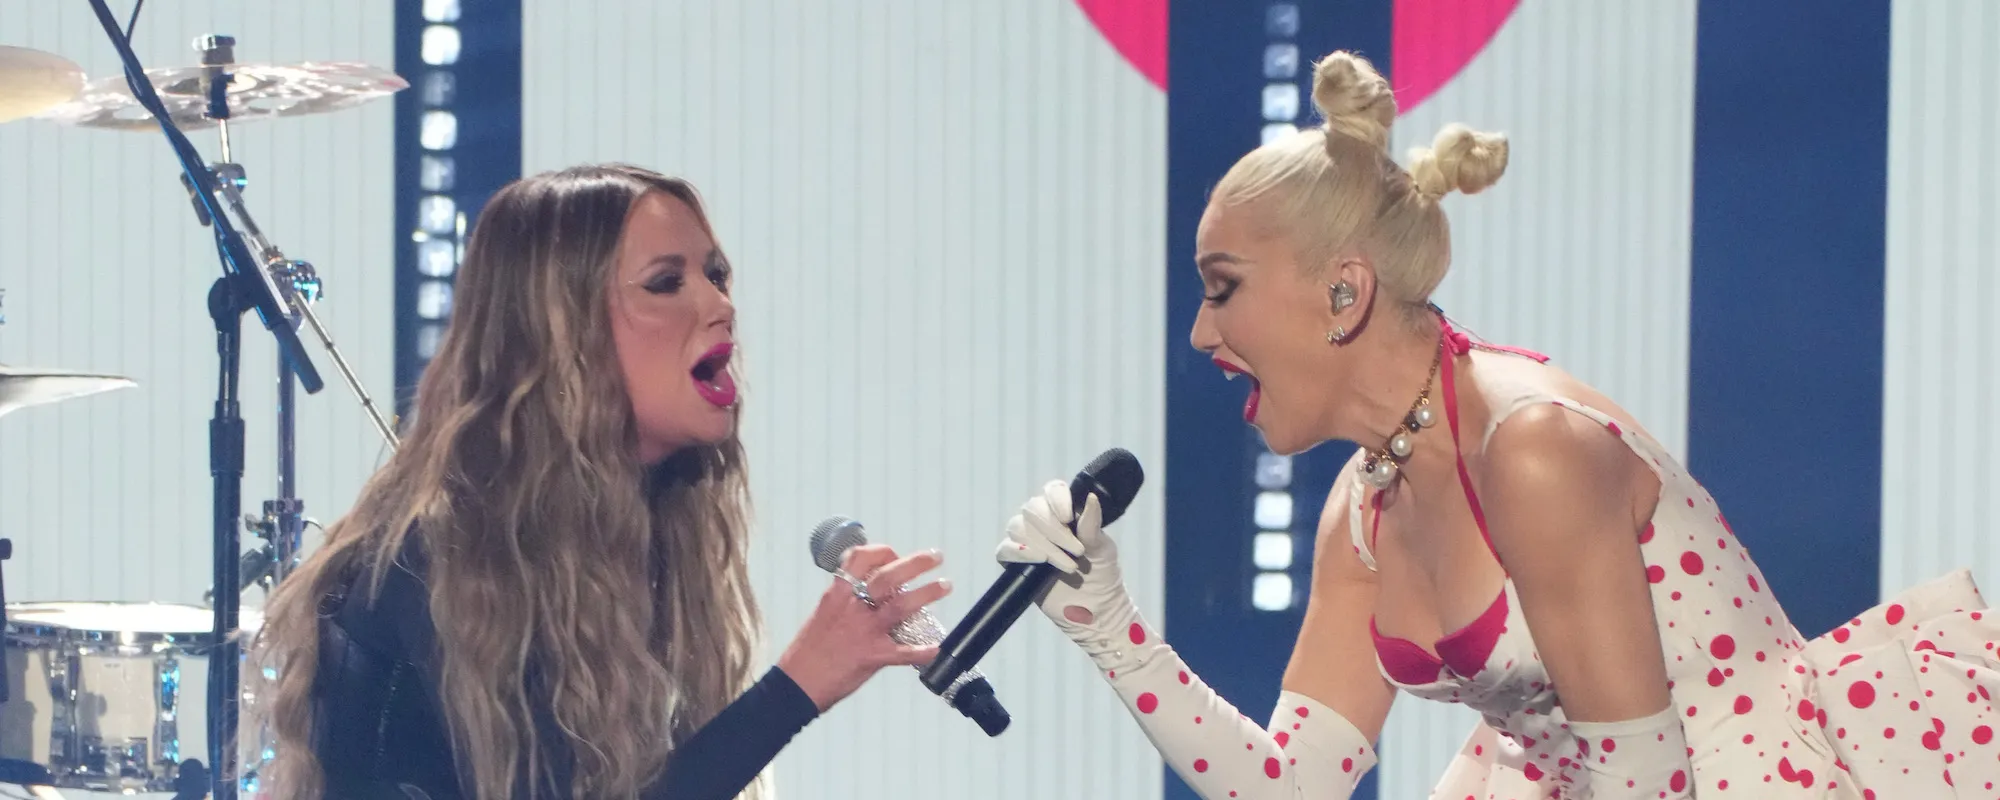 Gwen Stefani Brings No Doubt’s “Just A Girl” to CMT Awards